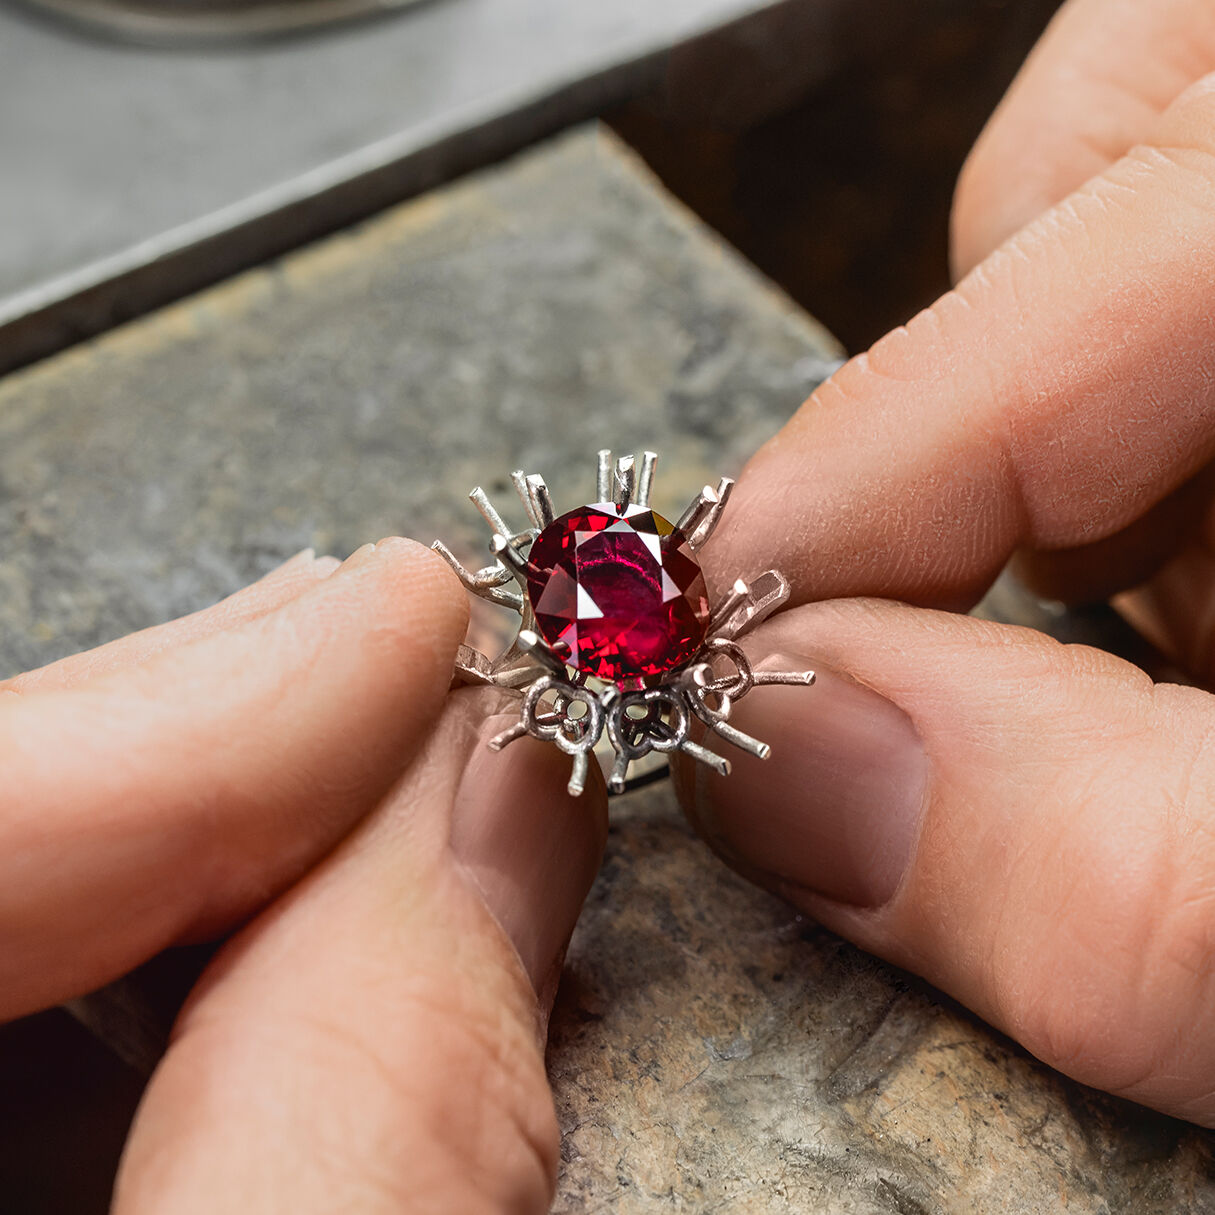 Image of Graff Ruby High Jewellery Ring being created in Graff London workshop